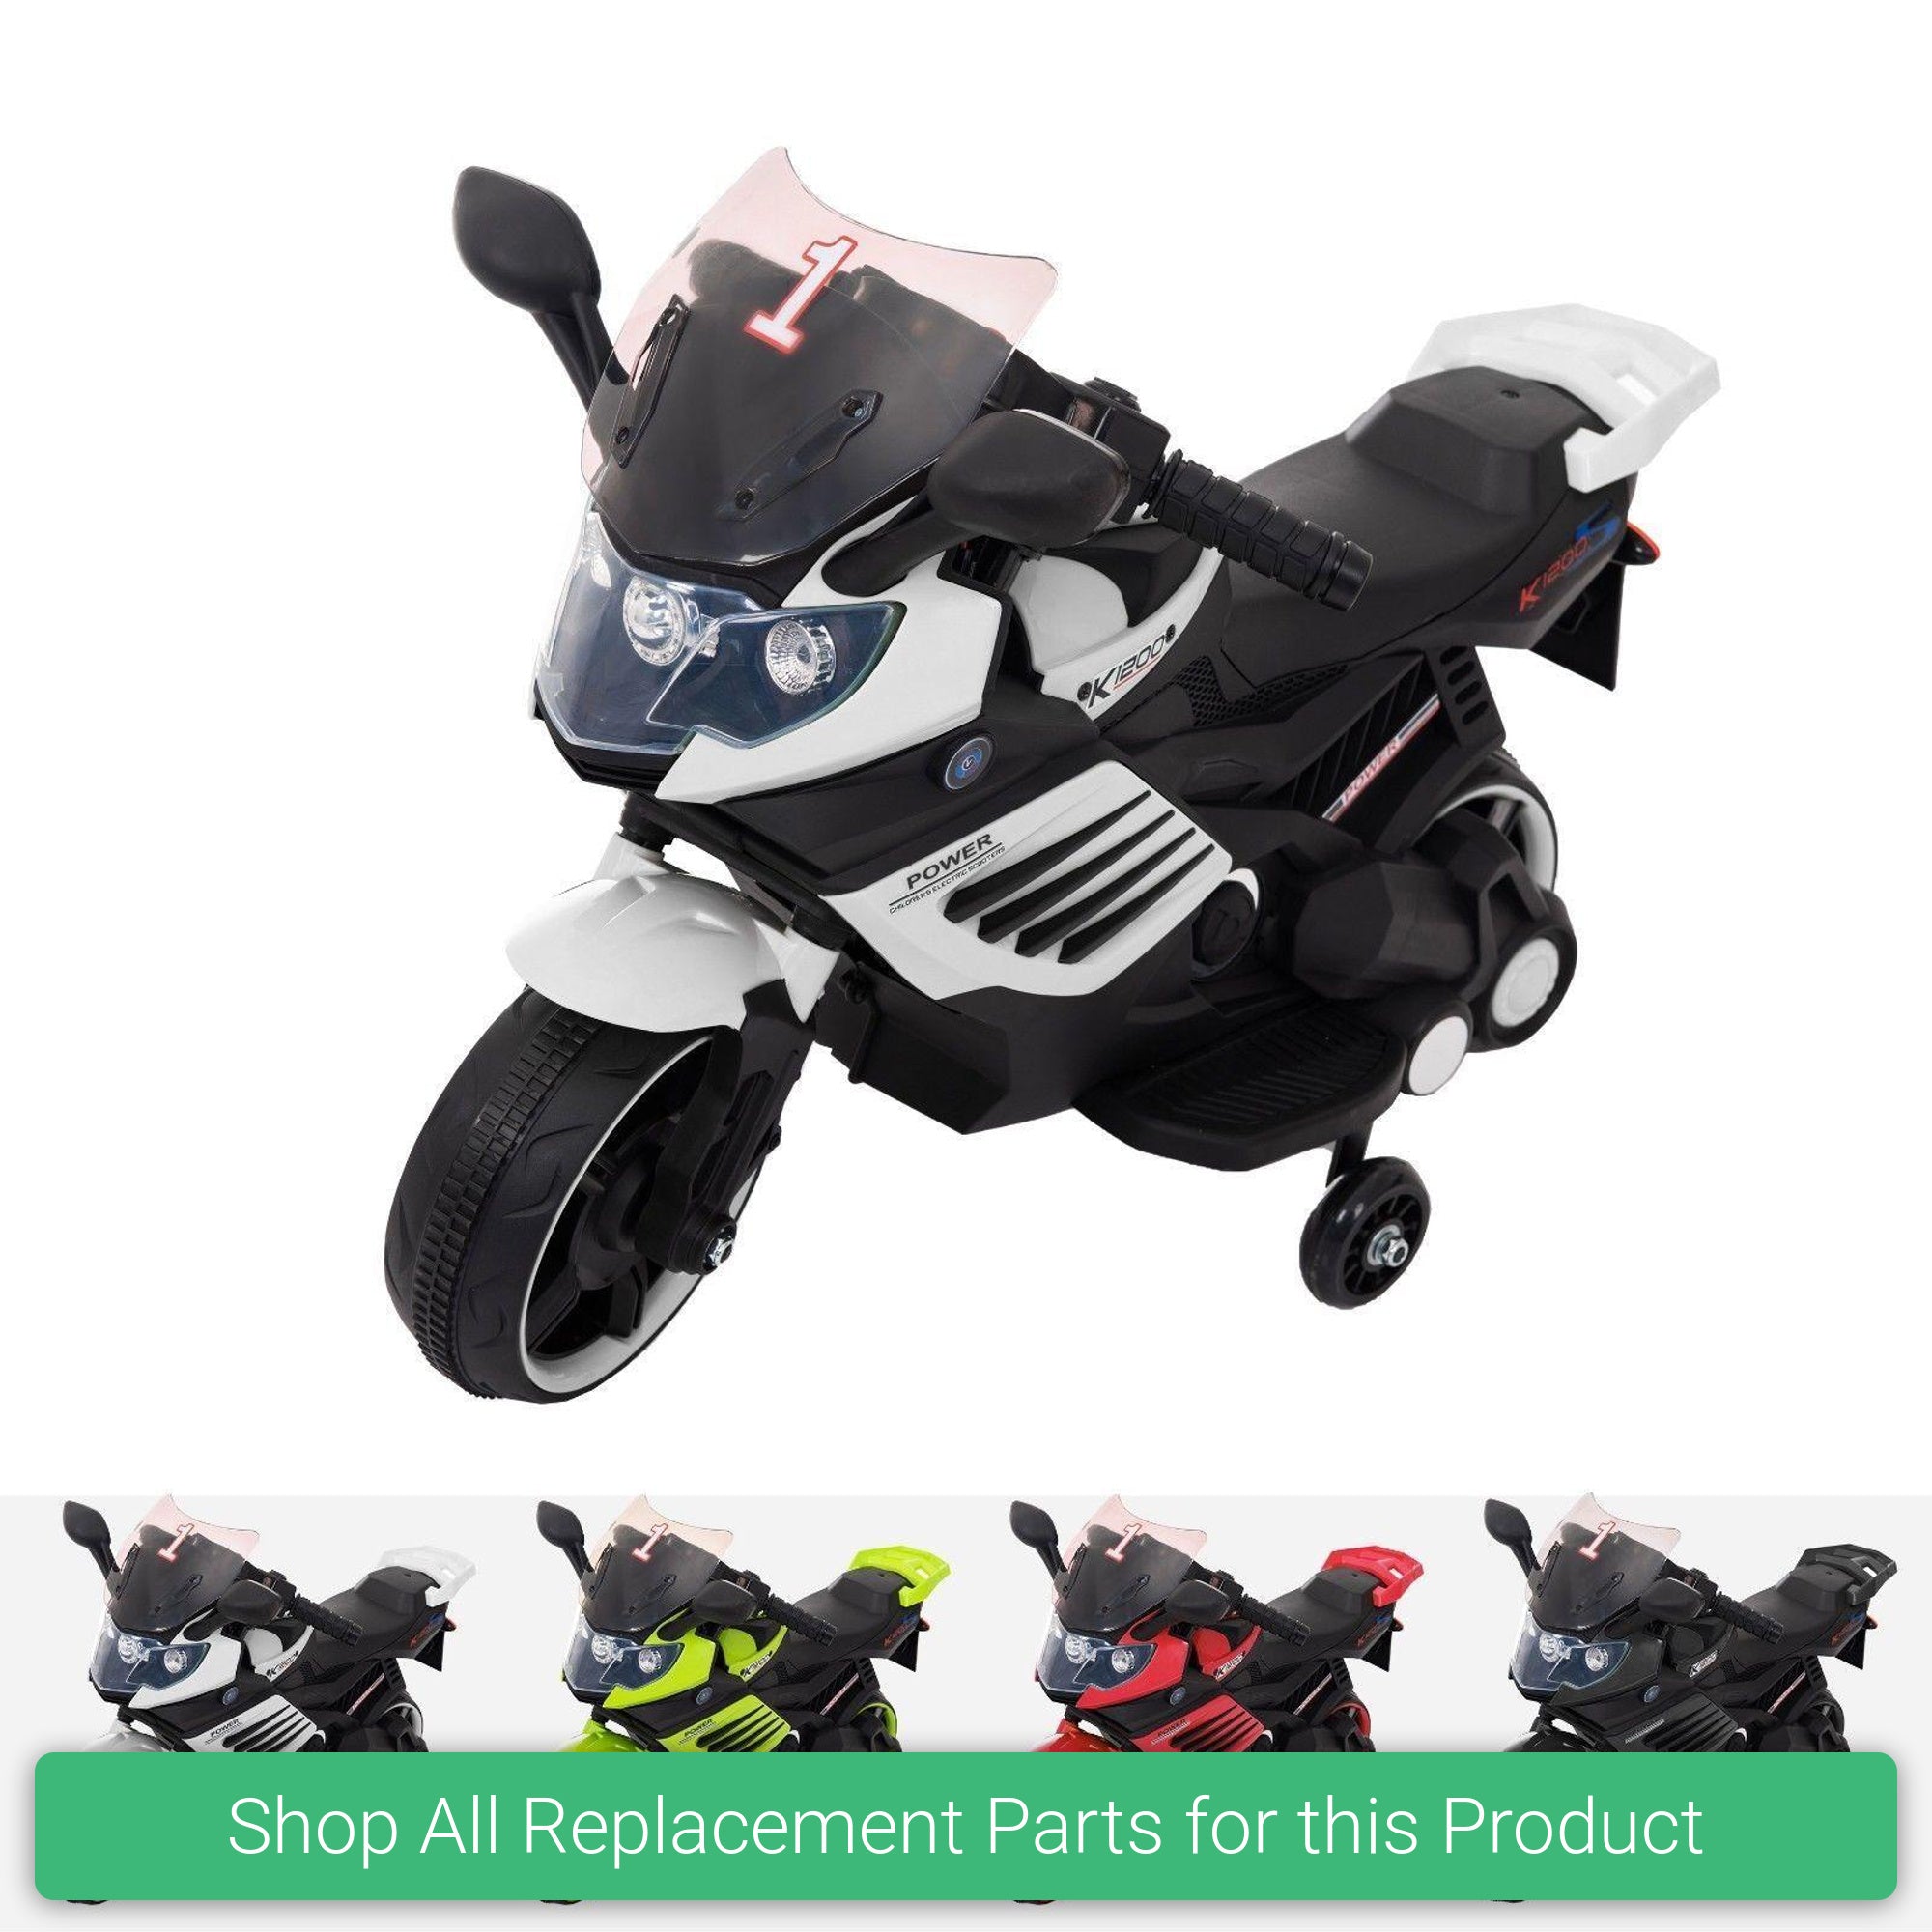 Replacement Parts and Spares for Kids R6 Mini Style Motorbike - YAMR6-2019V1 - LQ-158